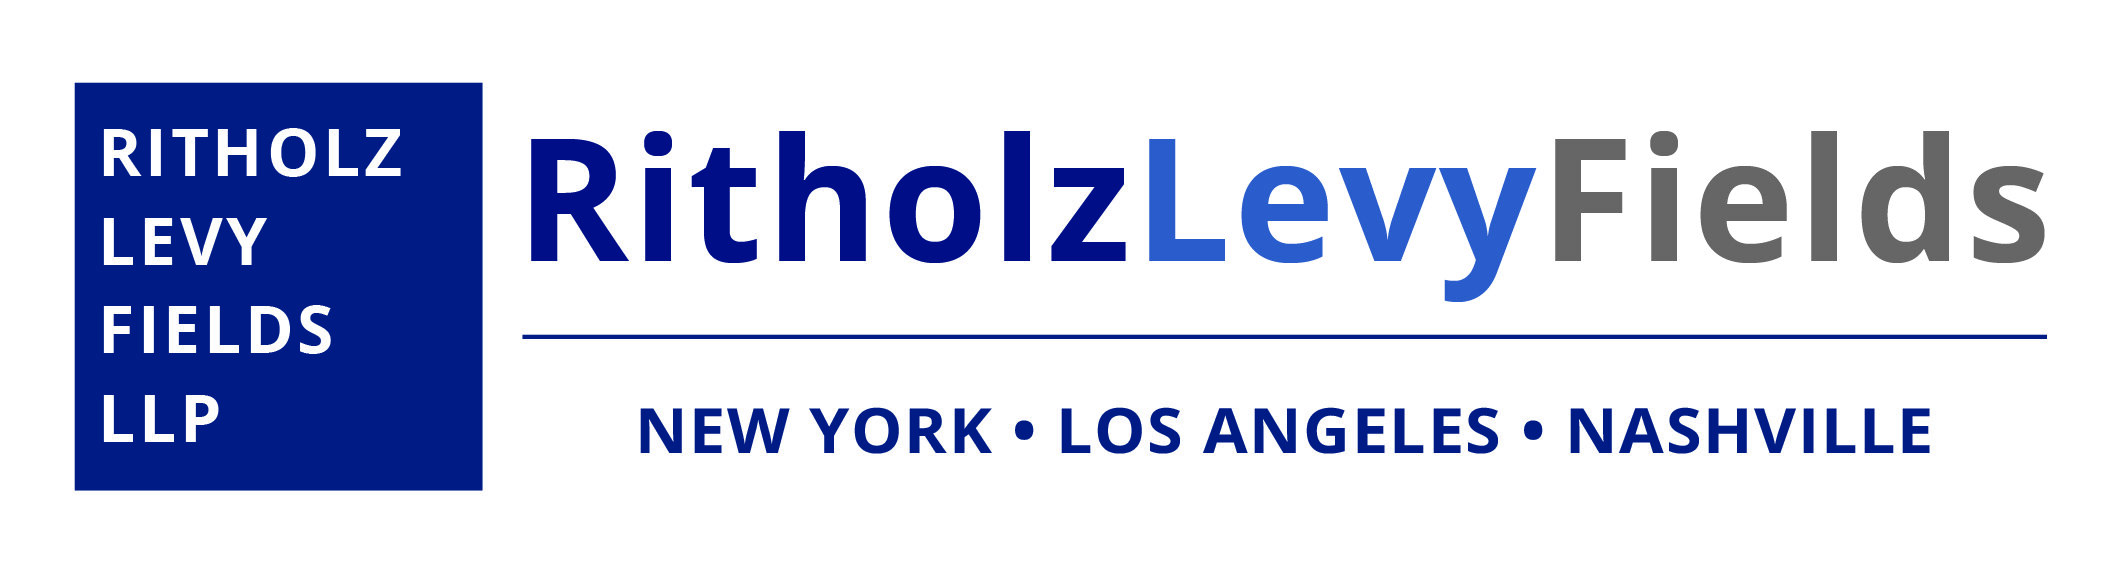 Ritholz Levy Fields LLP